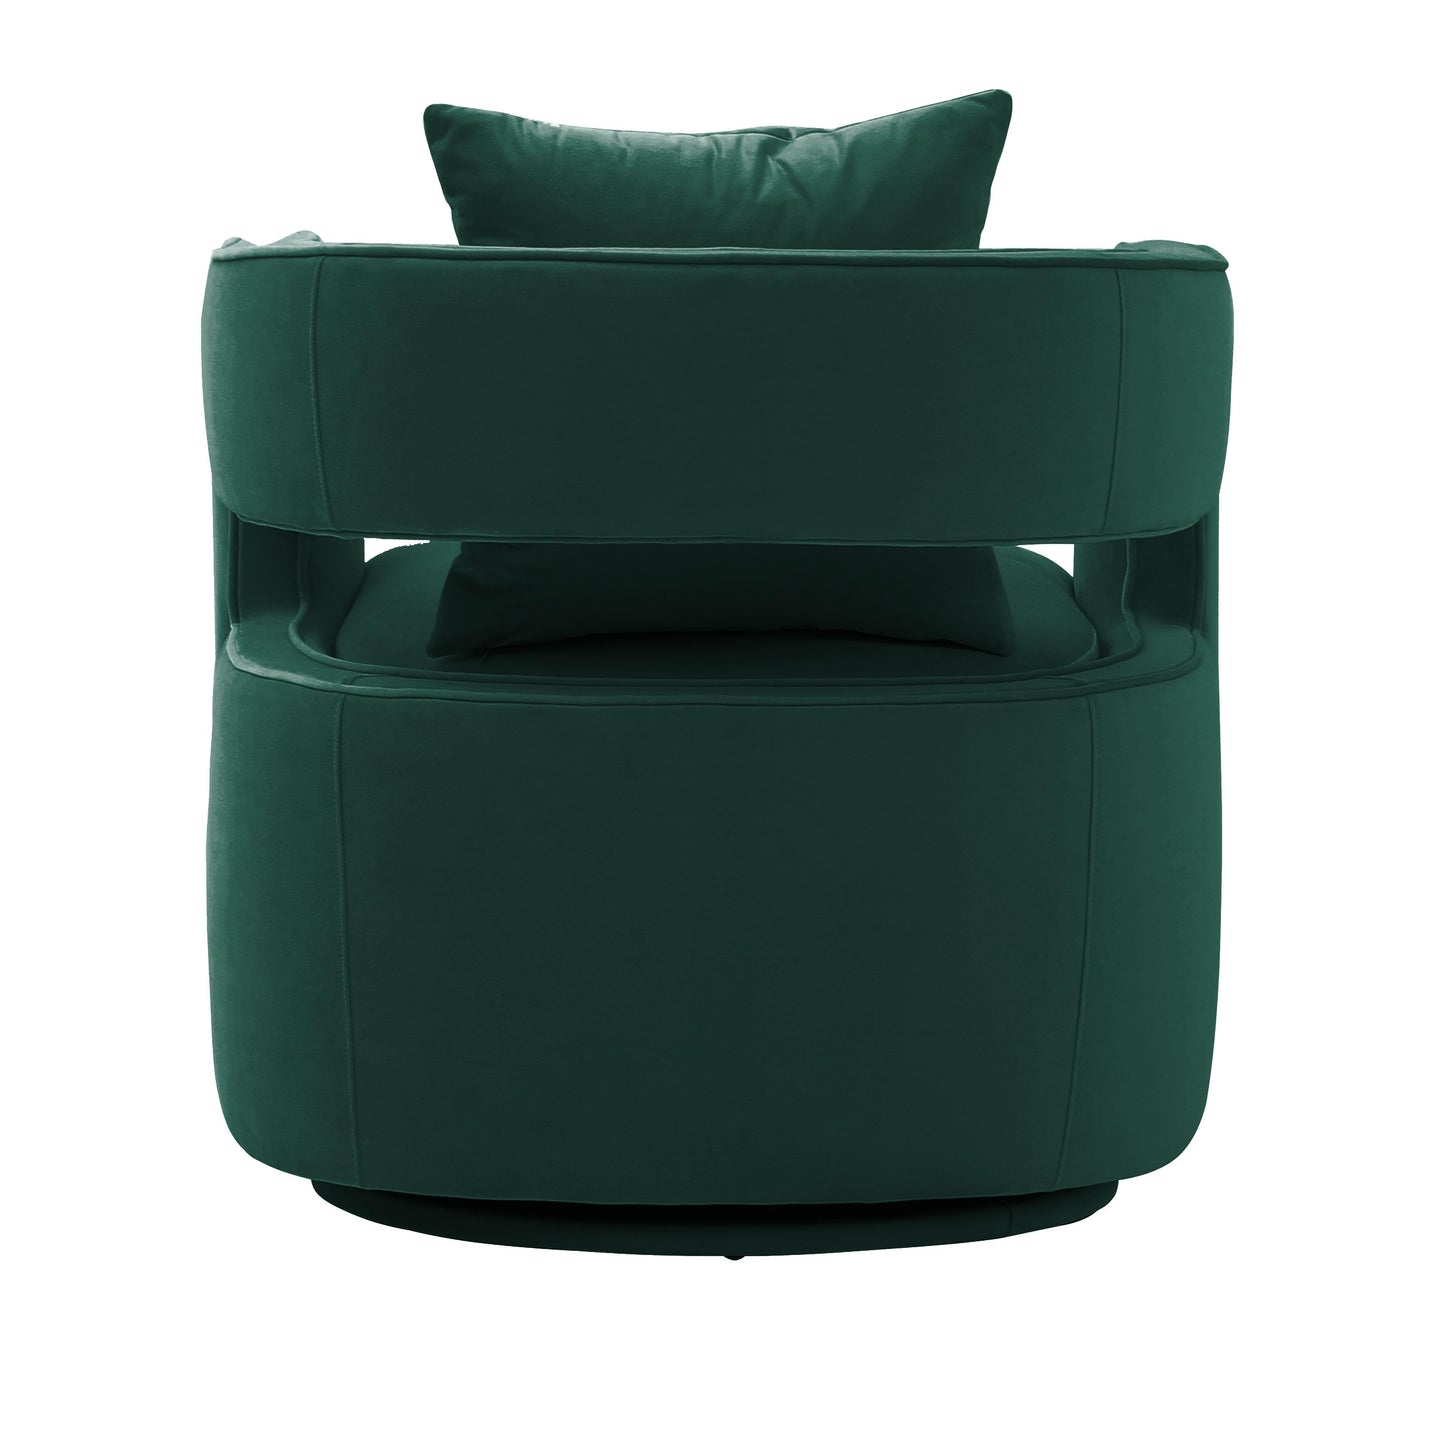 Kennedy Forest Green Swivel Chair by TOV